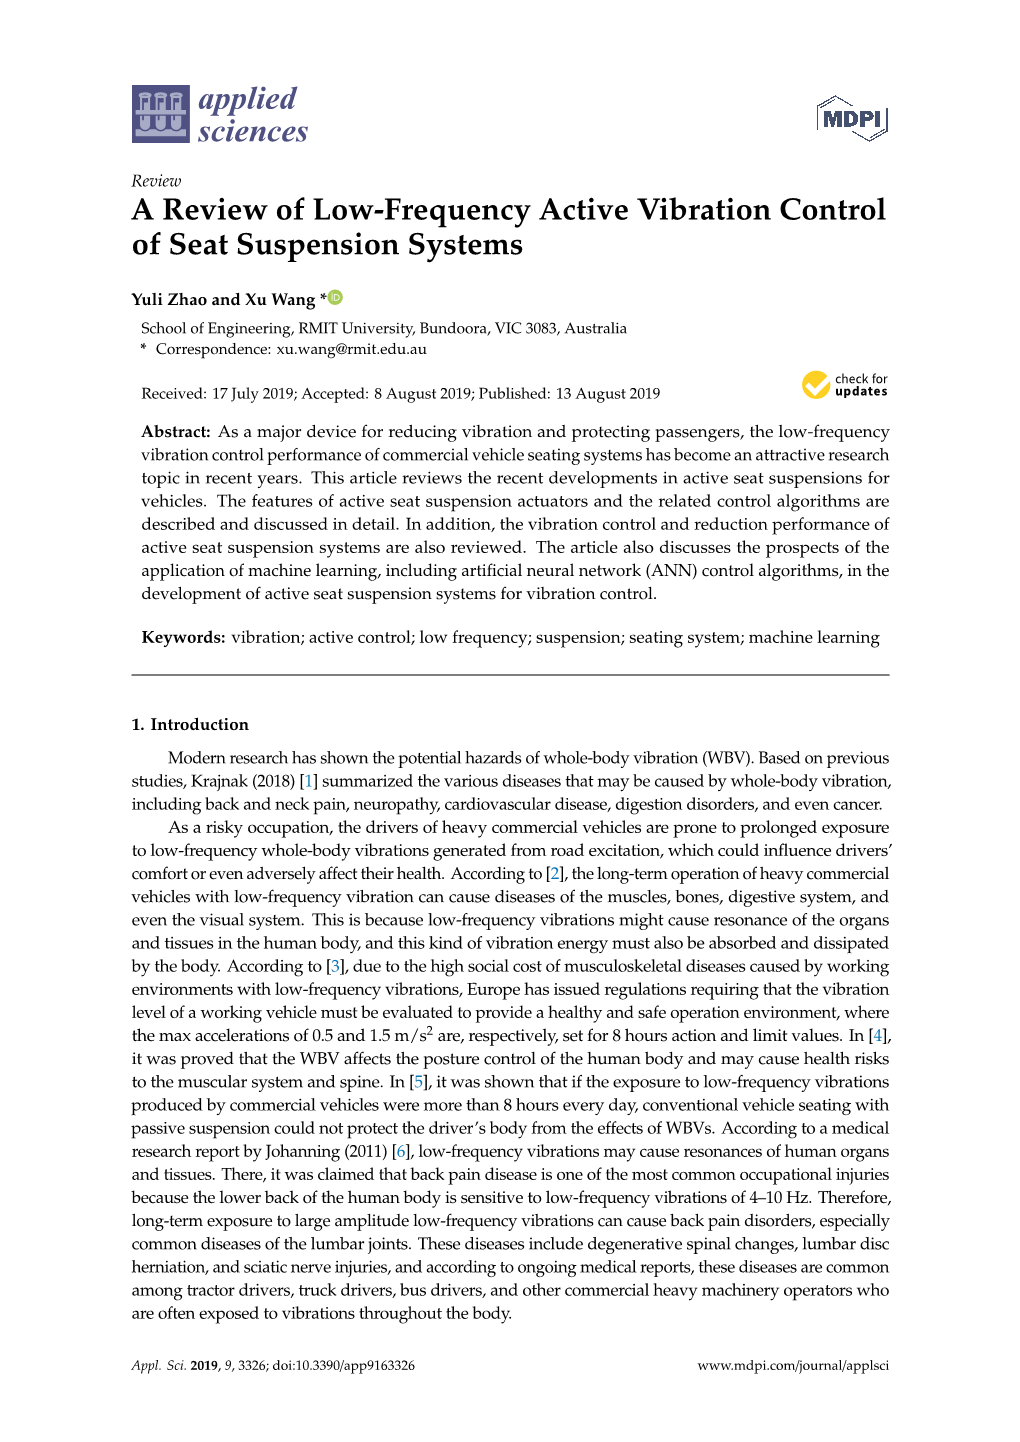 A Review of Low-Frequency Active Vibration Control of Seat Suspension Systems